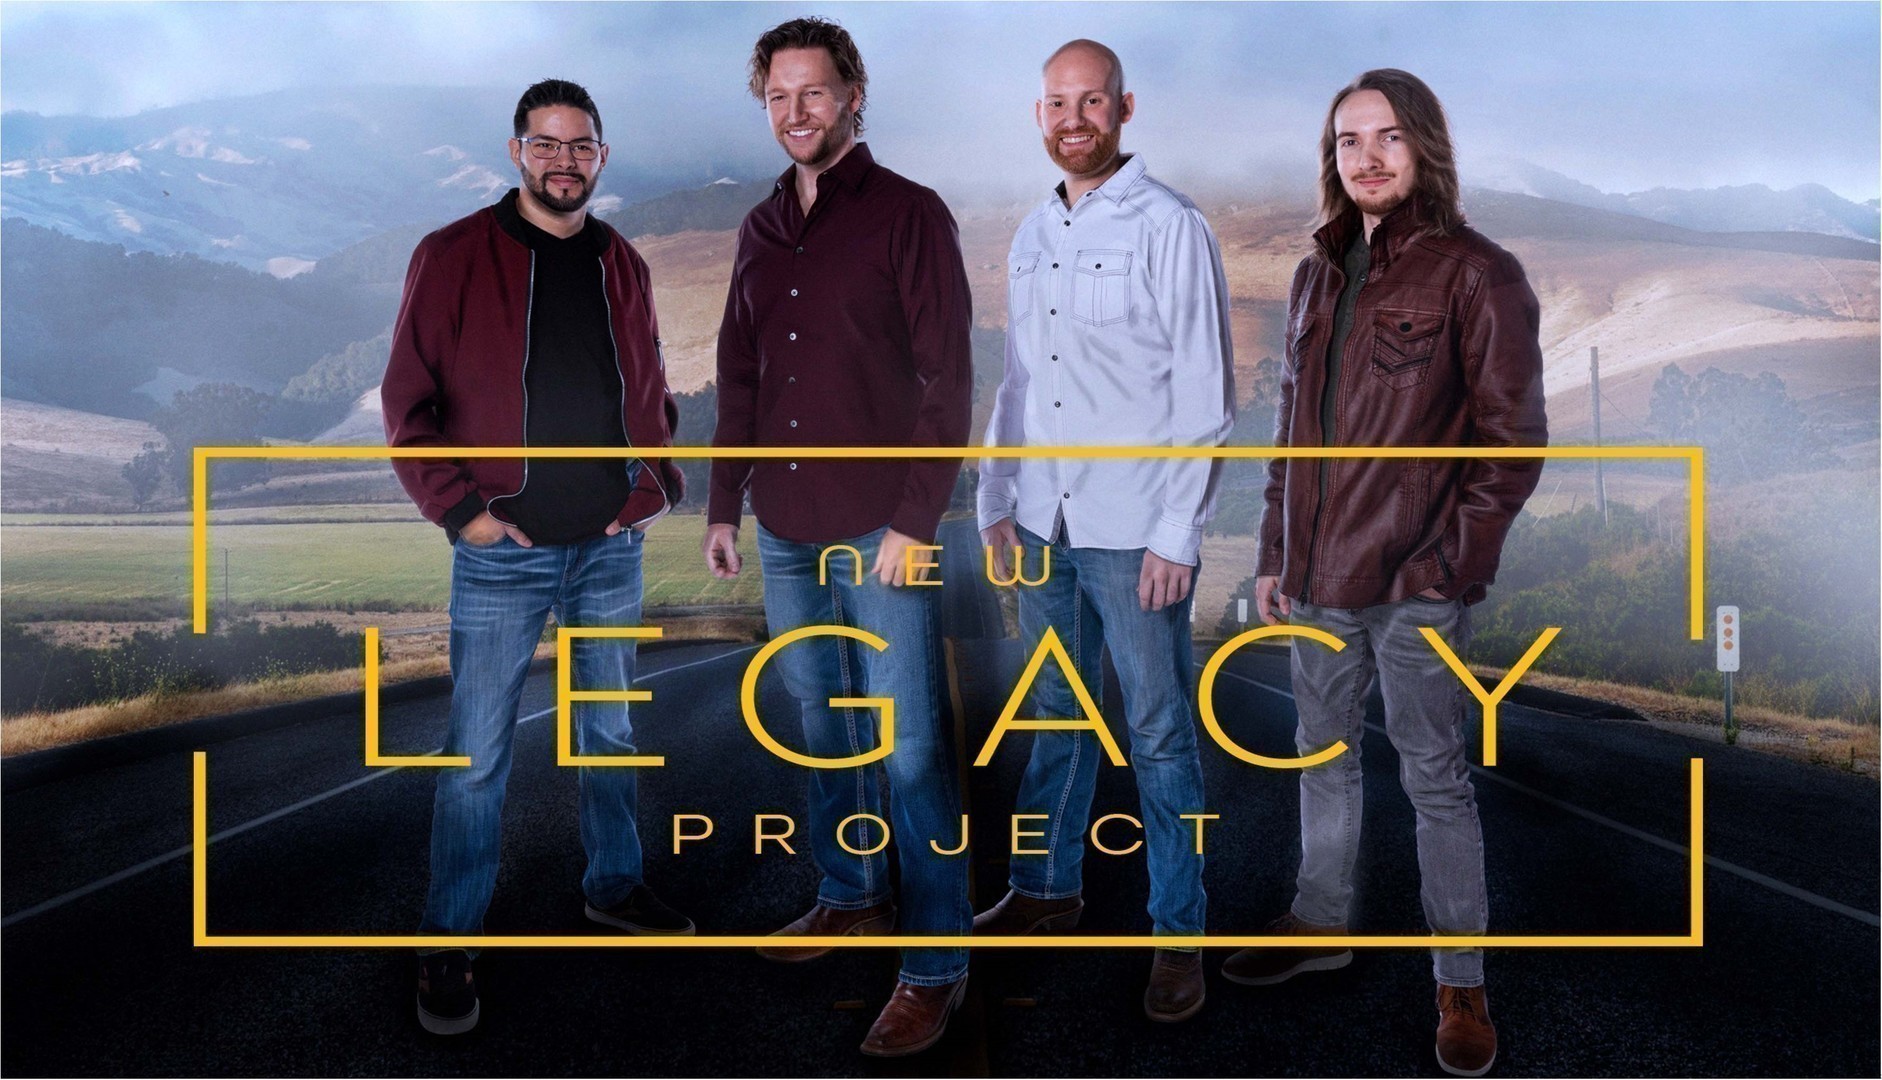 Live DEC 2 Concert in Buckeye with Popular Nashville-based Men's Vocal Band, NEW LEGACY PROJECT, Buckeye, Arizona, United States